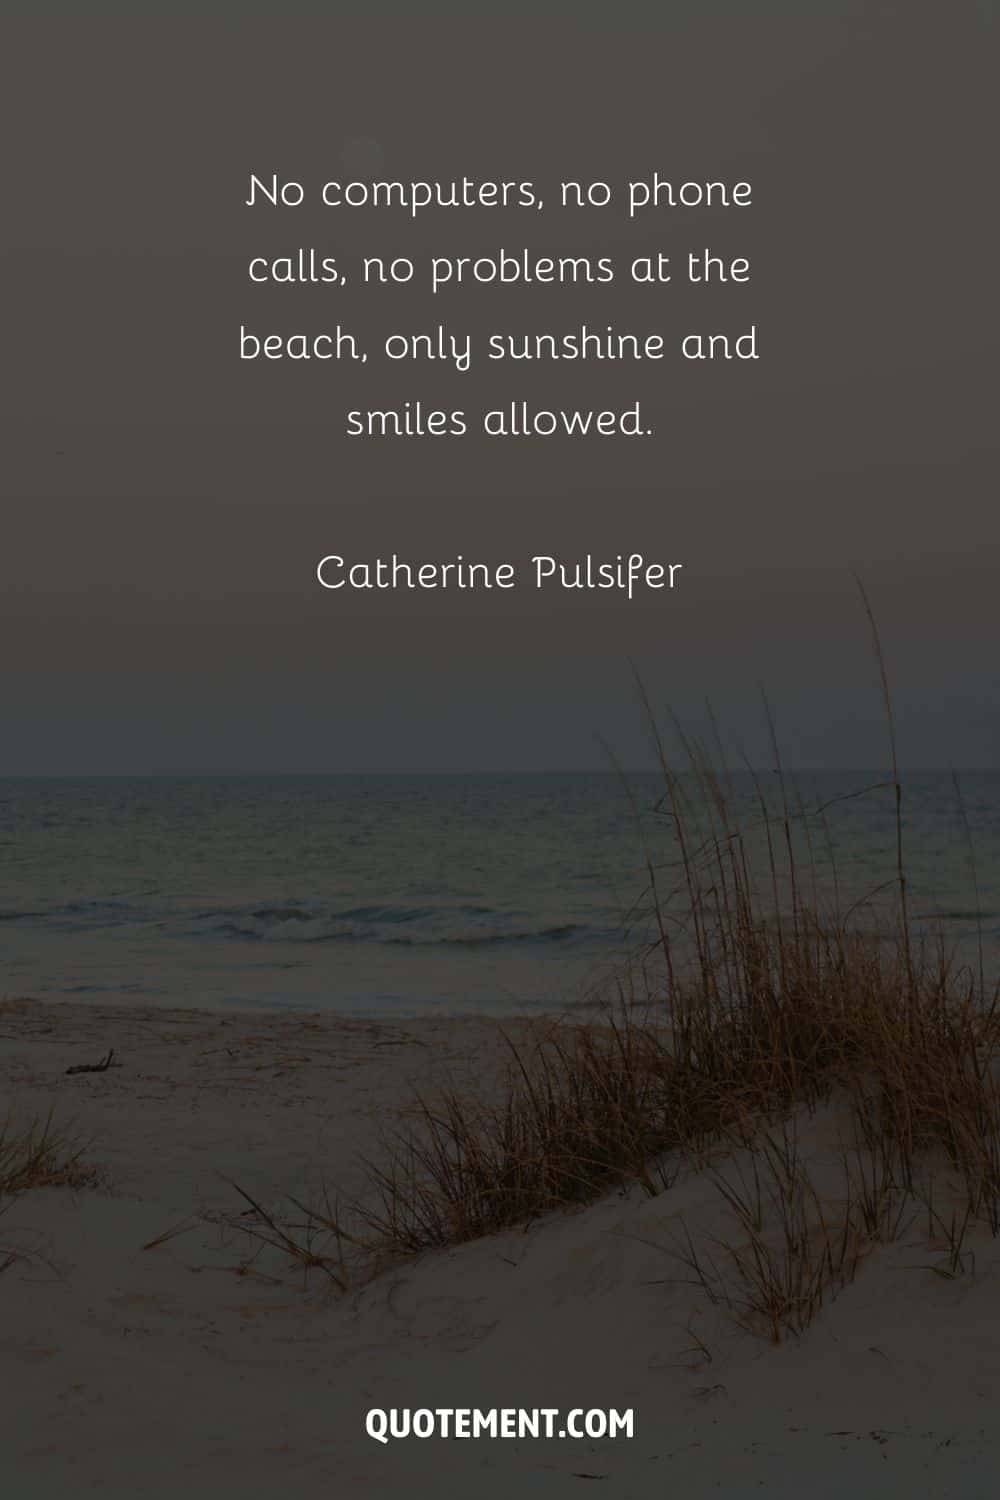 No computers, no phone calls, no problems at the beach, only sunshine and smiles allowed. — Catherine Pulsifer